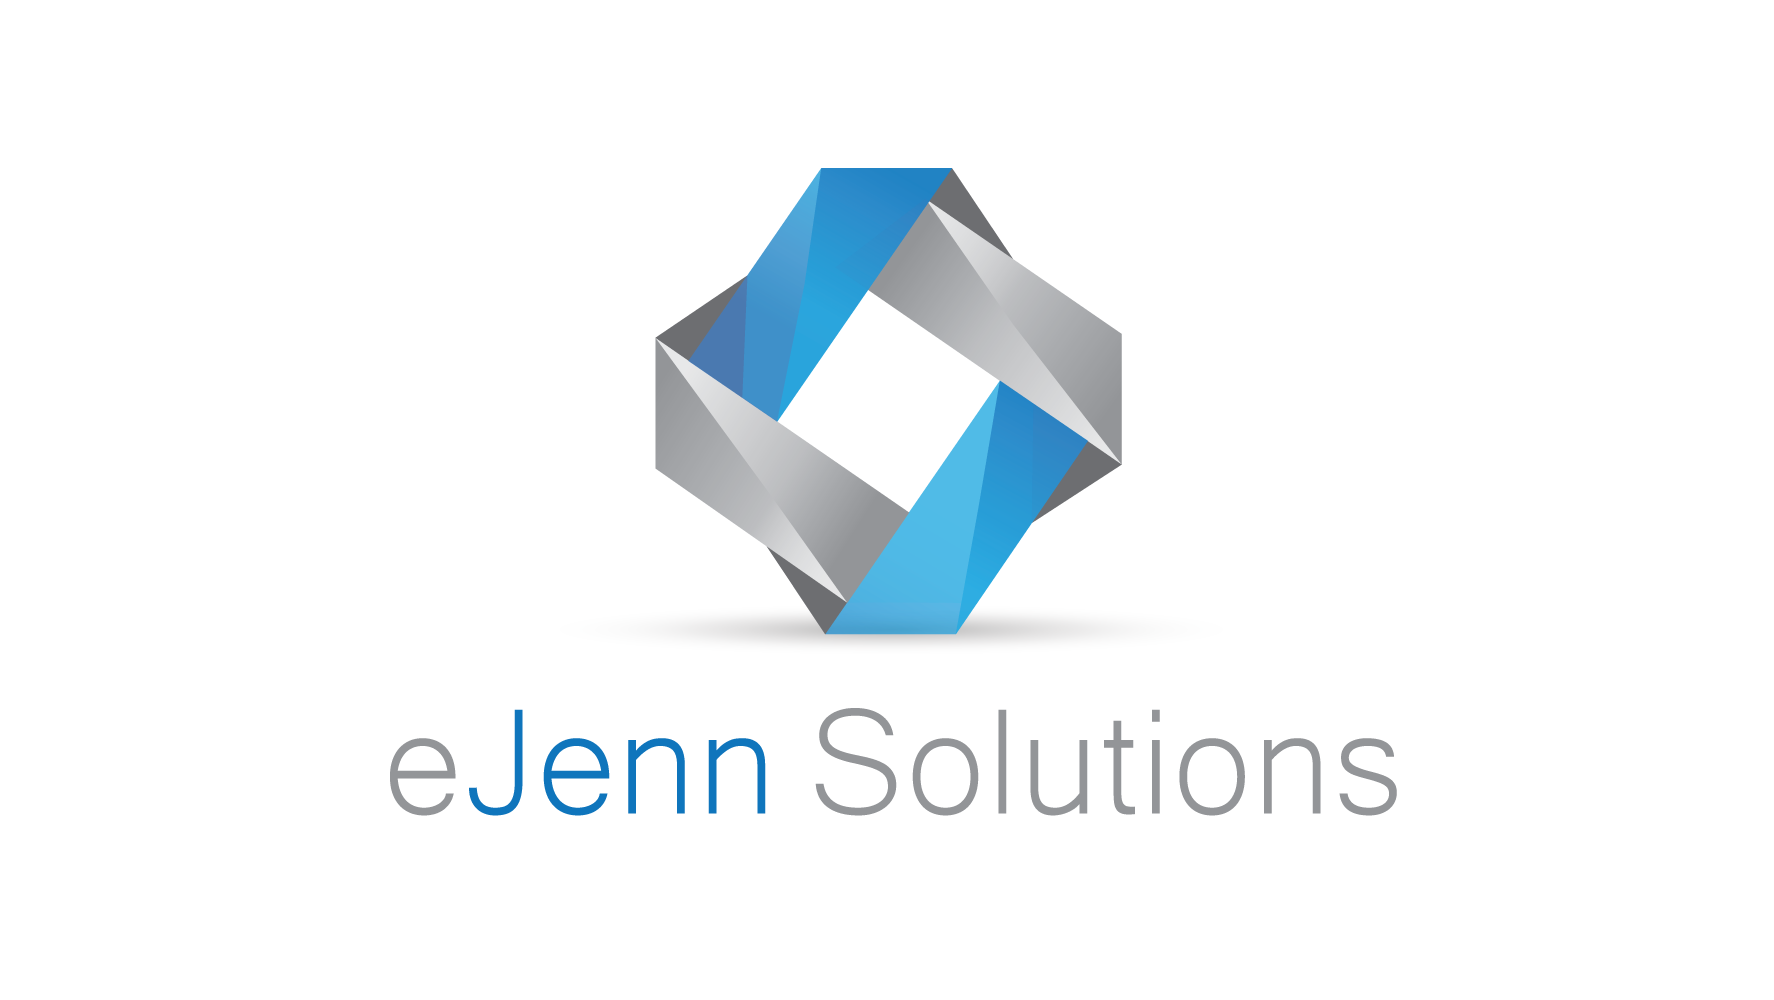 eJenn Solutions, Inc. profile on Qualified.One